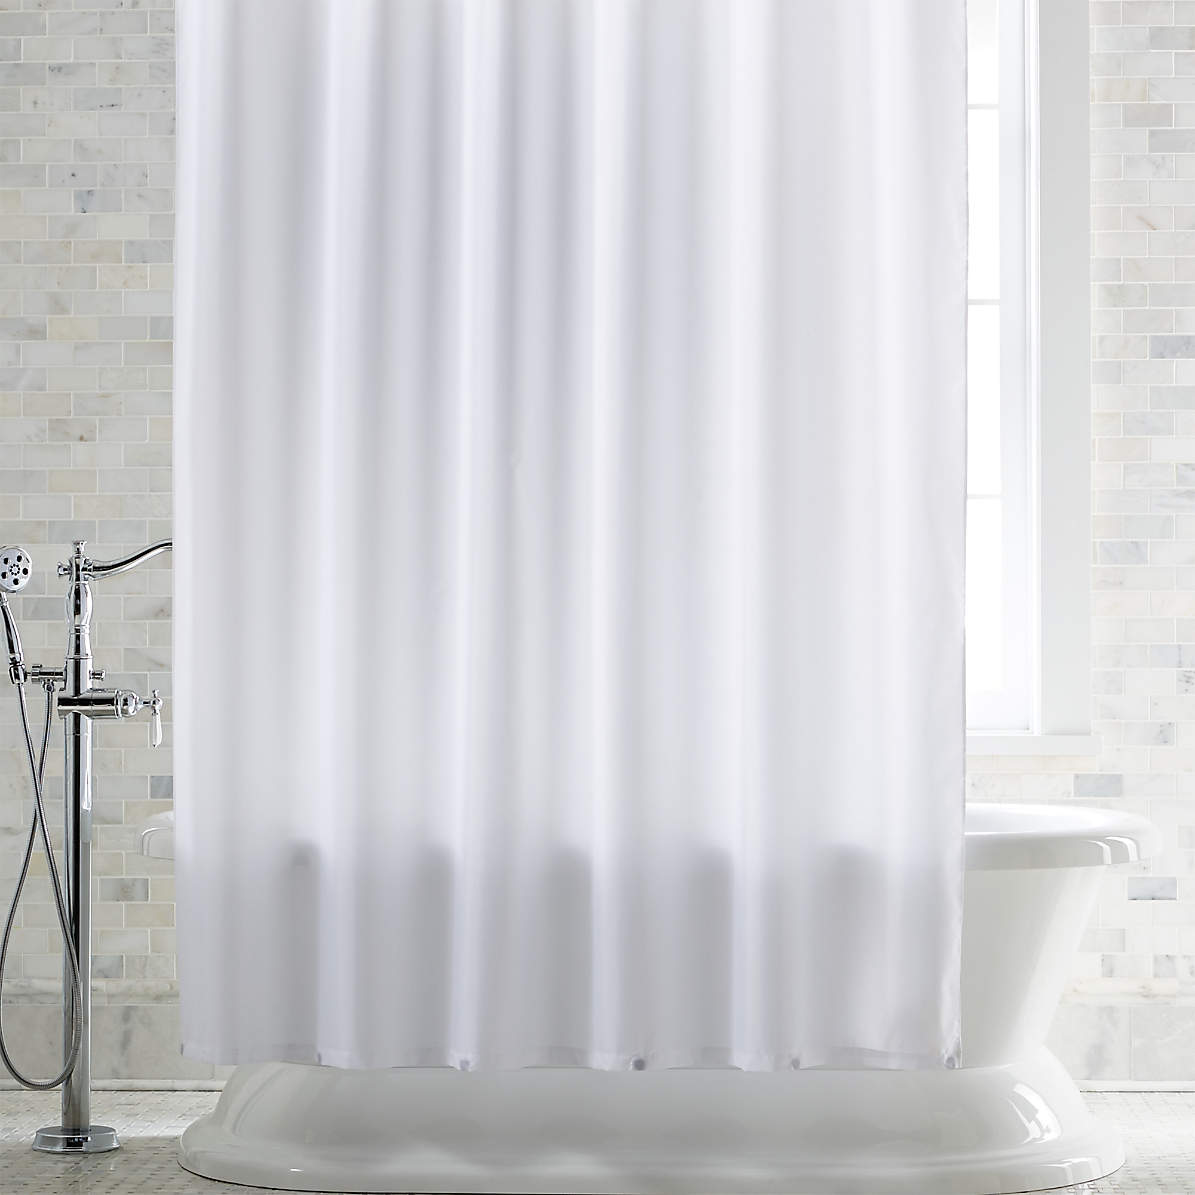 White Shower Curtain Liner With Magnets, Shower Curtain Or Liner